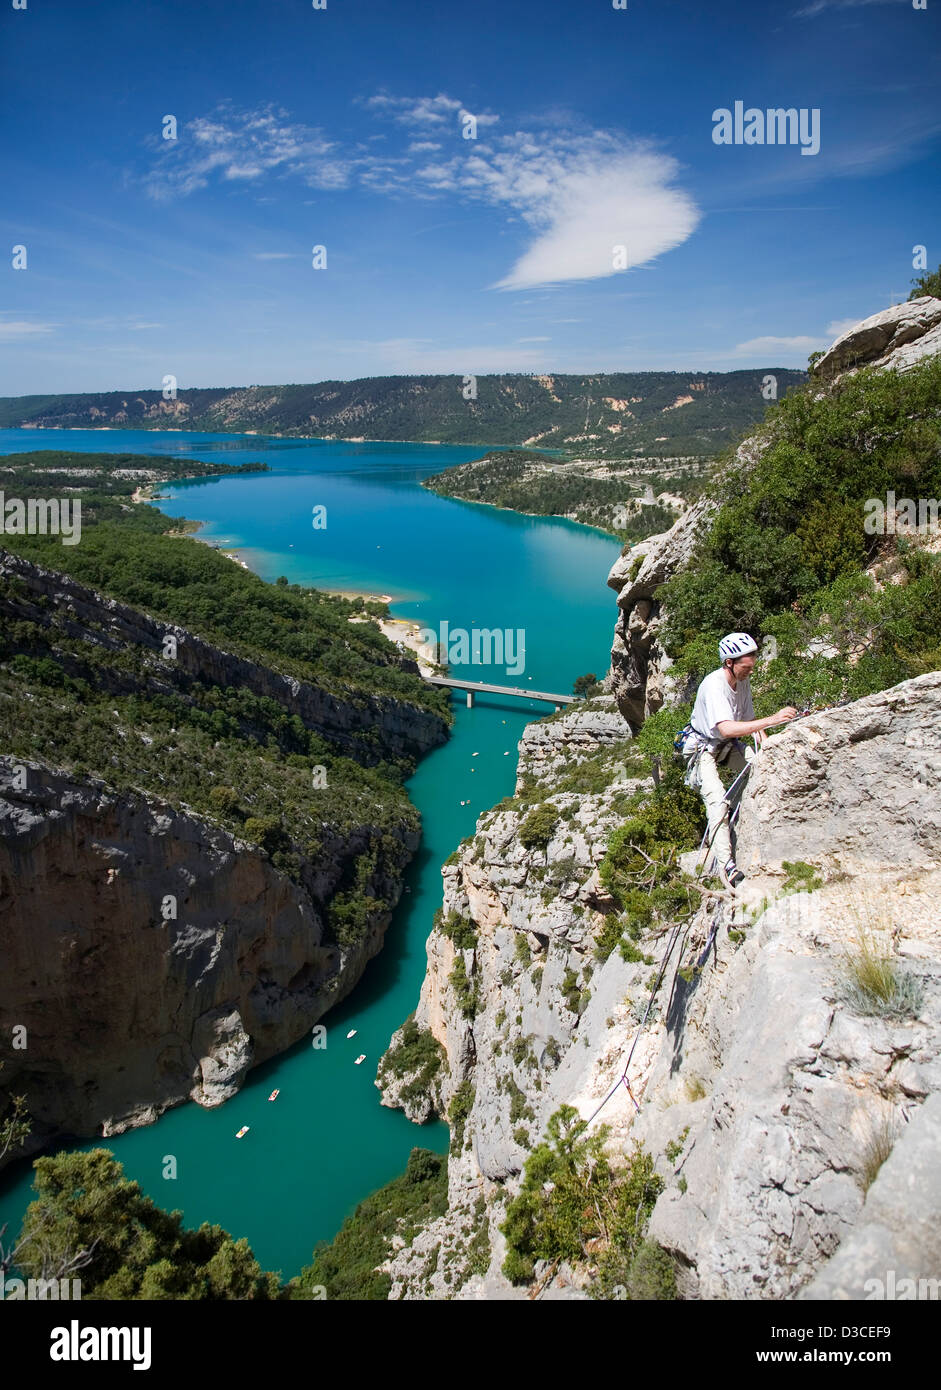 Rock-climber With View Of Lac De Sainte Croix In Background, Canyon Du Verdon, Provence, France, Europe Stock Photo